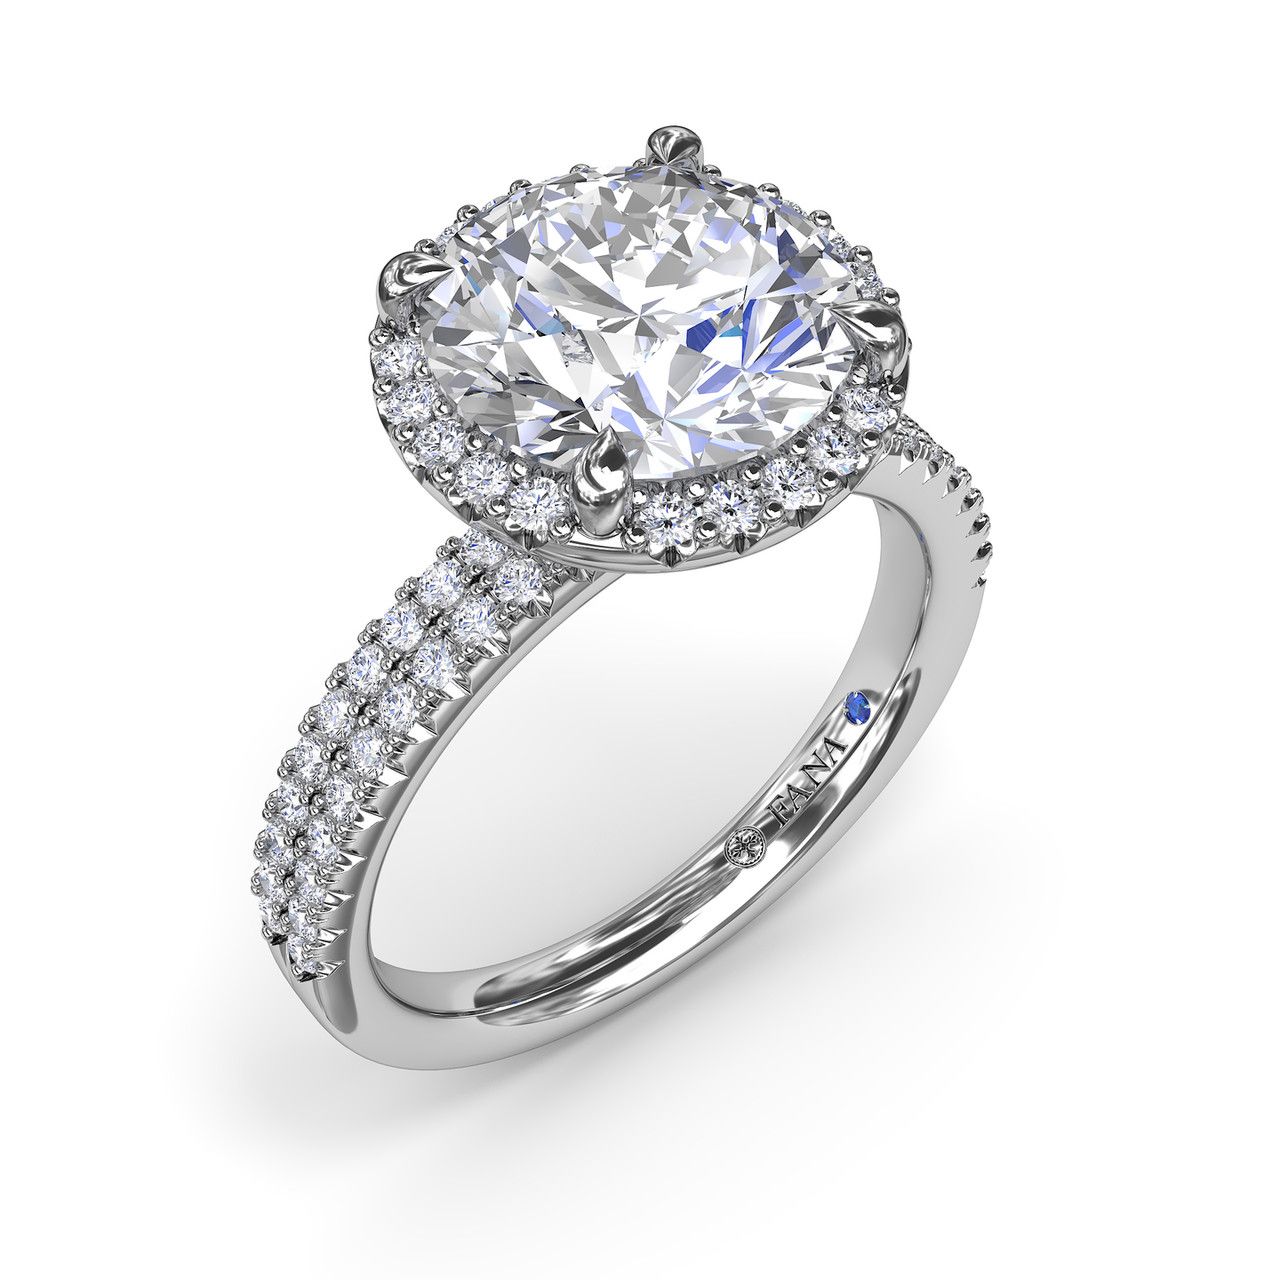 14K WHITE GOLD HALO SEMI-MOUNT RING SIZE 6.5 WITH 66=0.50TW ROUND G-H VS2-SI1 DIAMONDS AND ONE ROUND BLUE SAPPHIRE   (5.51 GRAMS)